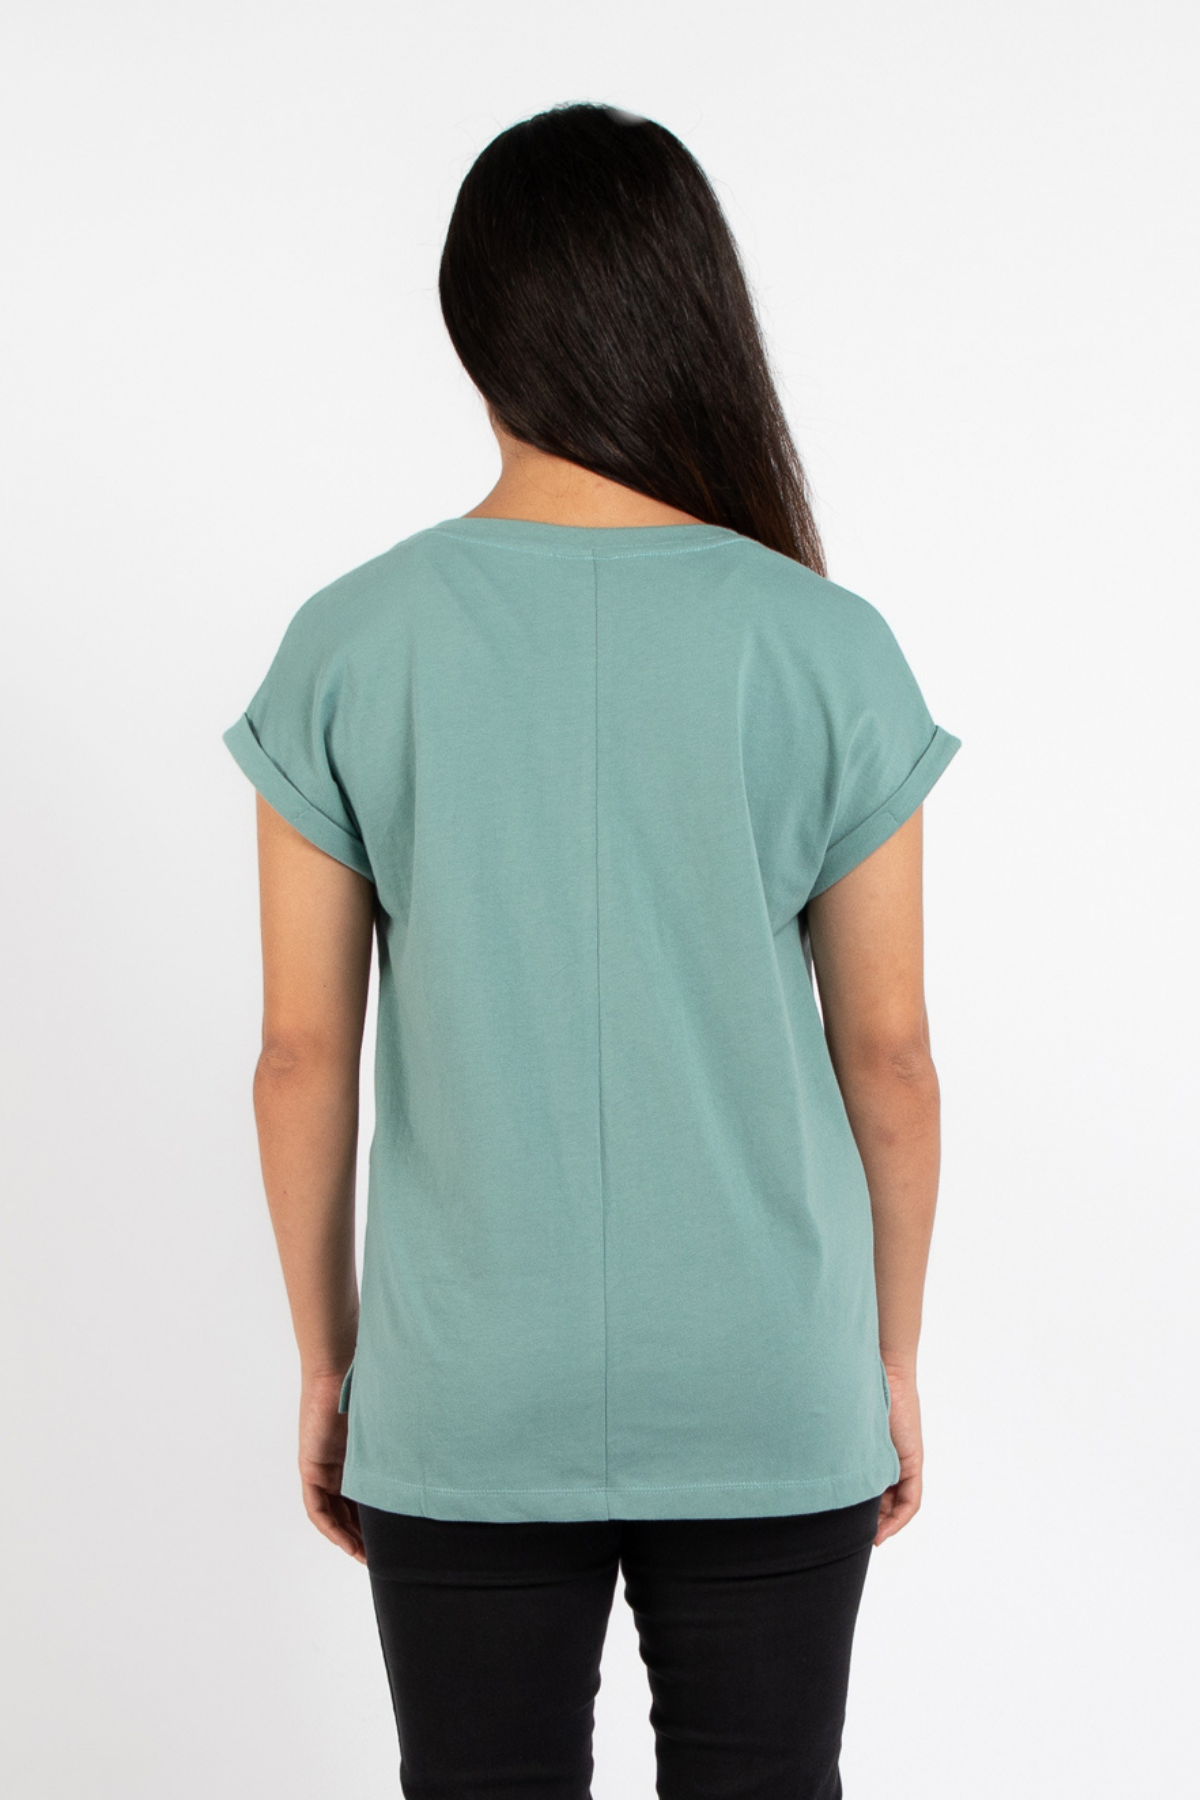 Dorsu Relaxed Crew Tee in Seafoam, available on ZERRIN